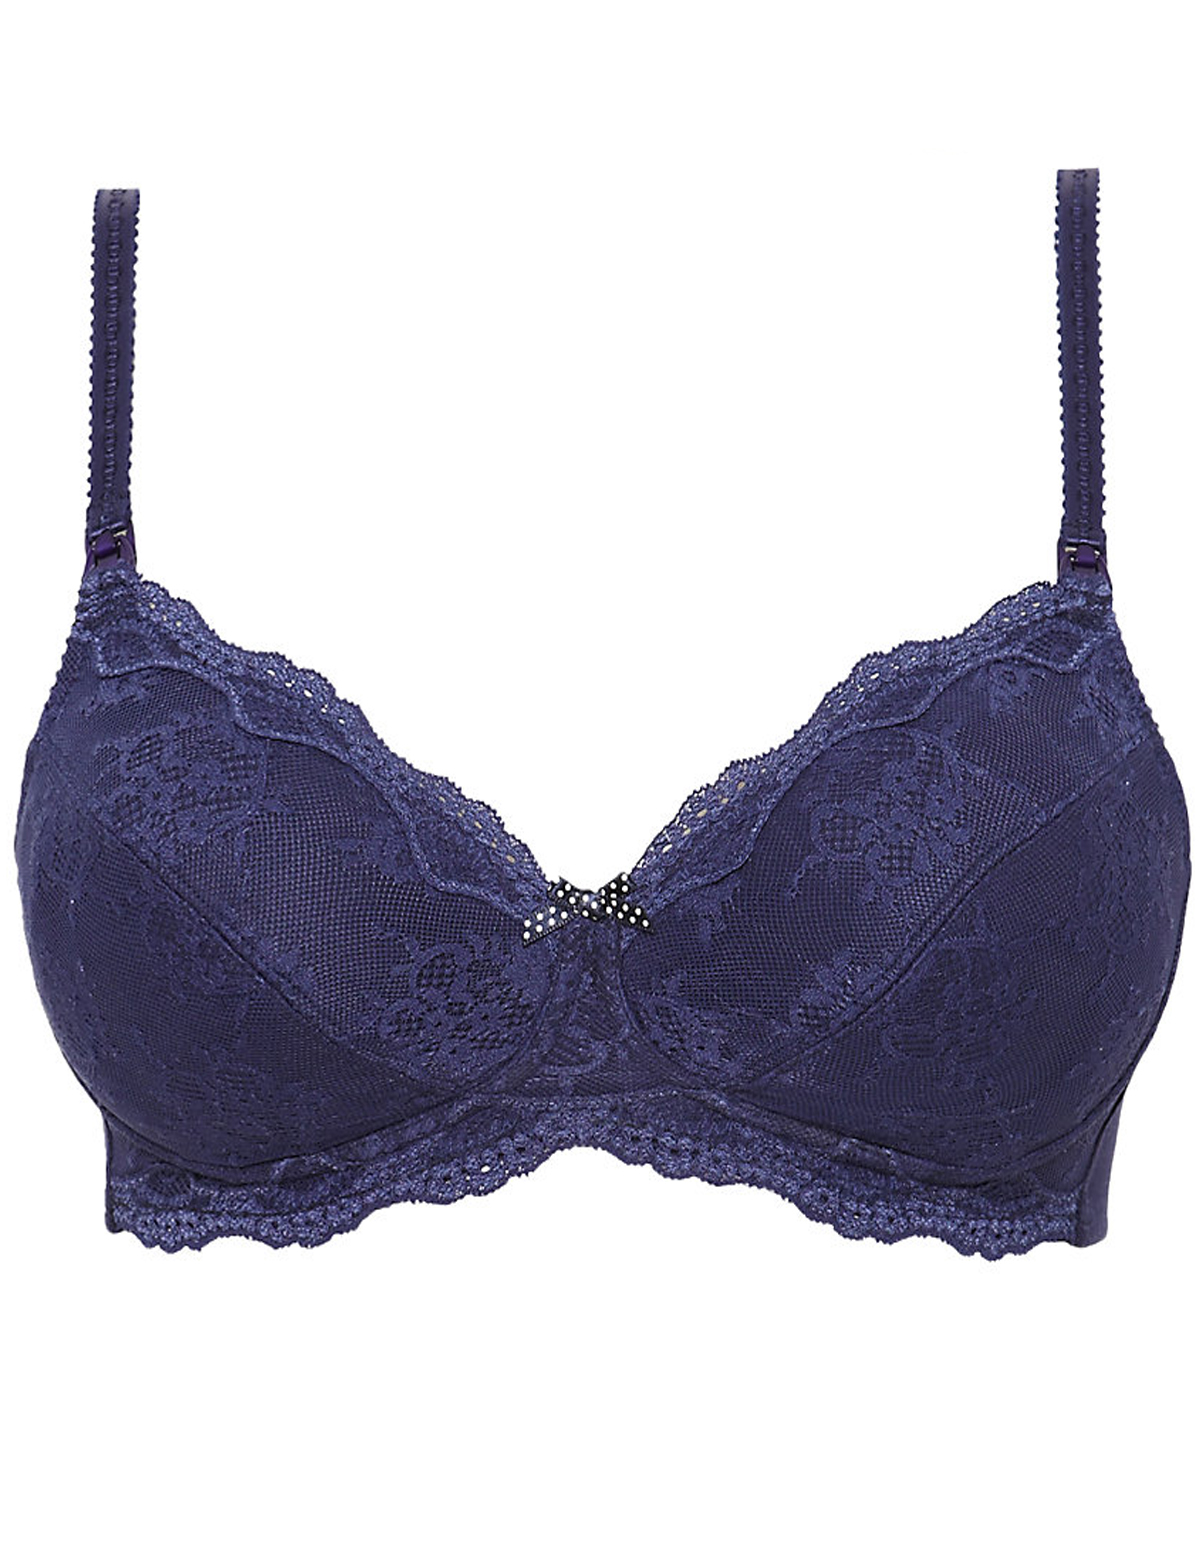 Marks and Spencer - - M&5 Navy Maternity Cotton Rich Lace Maternity Bra ...